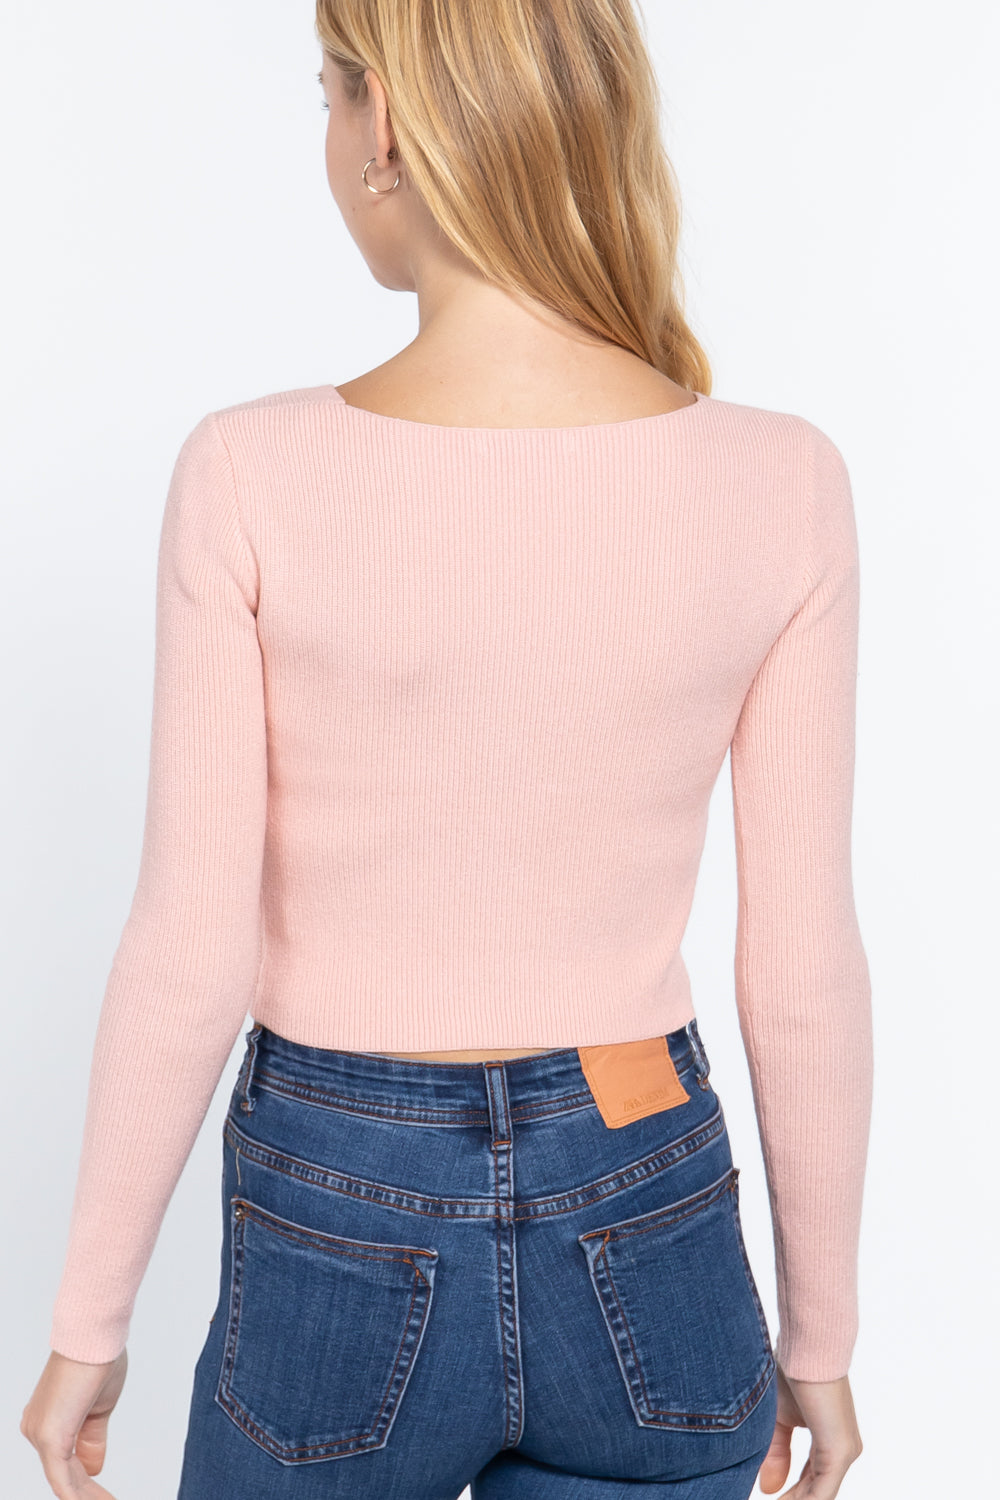 V-neck Front Knotted Crop Sweater- Multiple Colors